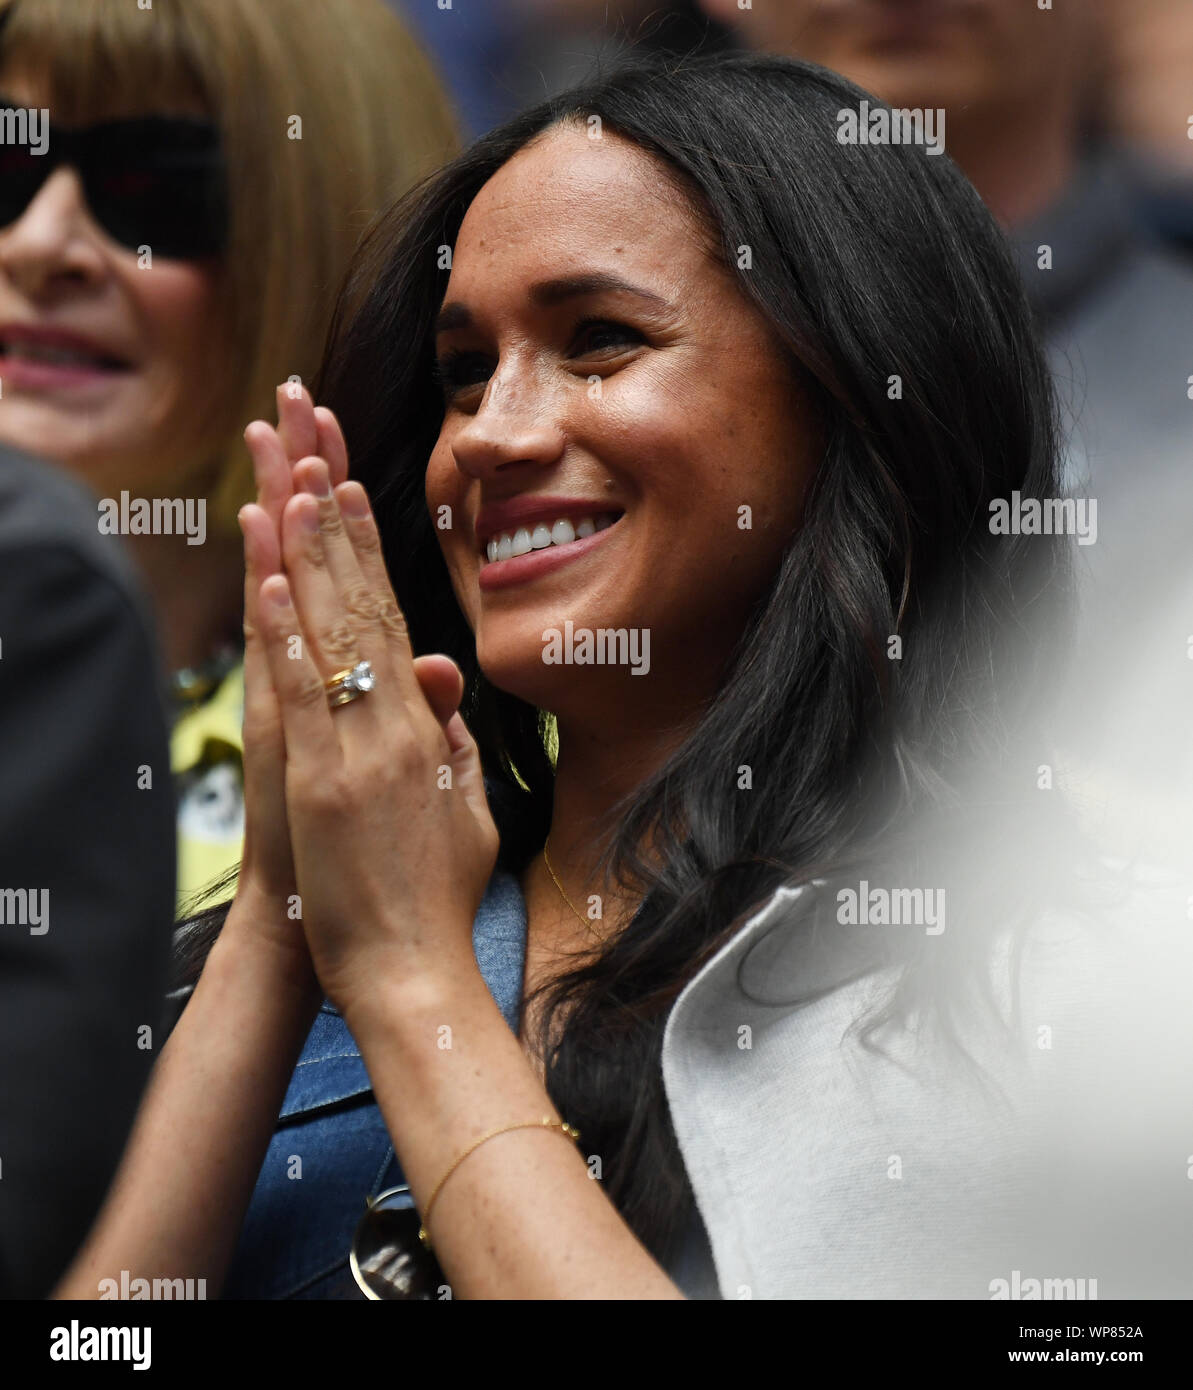 Flushing Meadows New York US Open Tennis Day 12 06/09/2019 Duchess of Sussex Meghan Markle  watches from player box as Serena Williams (USA) loses to Bianca Adreescu (CAN) in Ladies Singles Final Photo Roger Parker International Sports Fotos Ltd/Alamy Live News Stock Photo